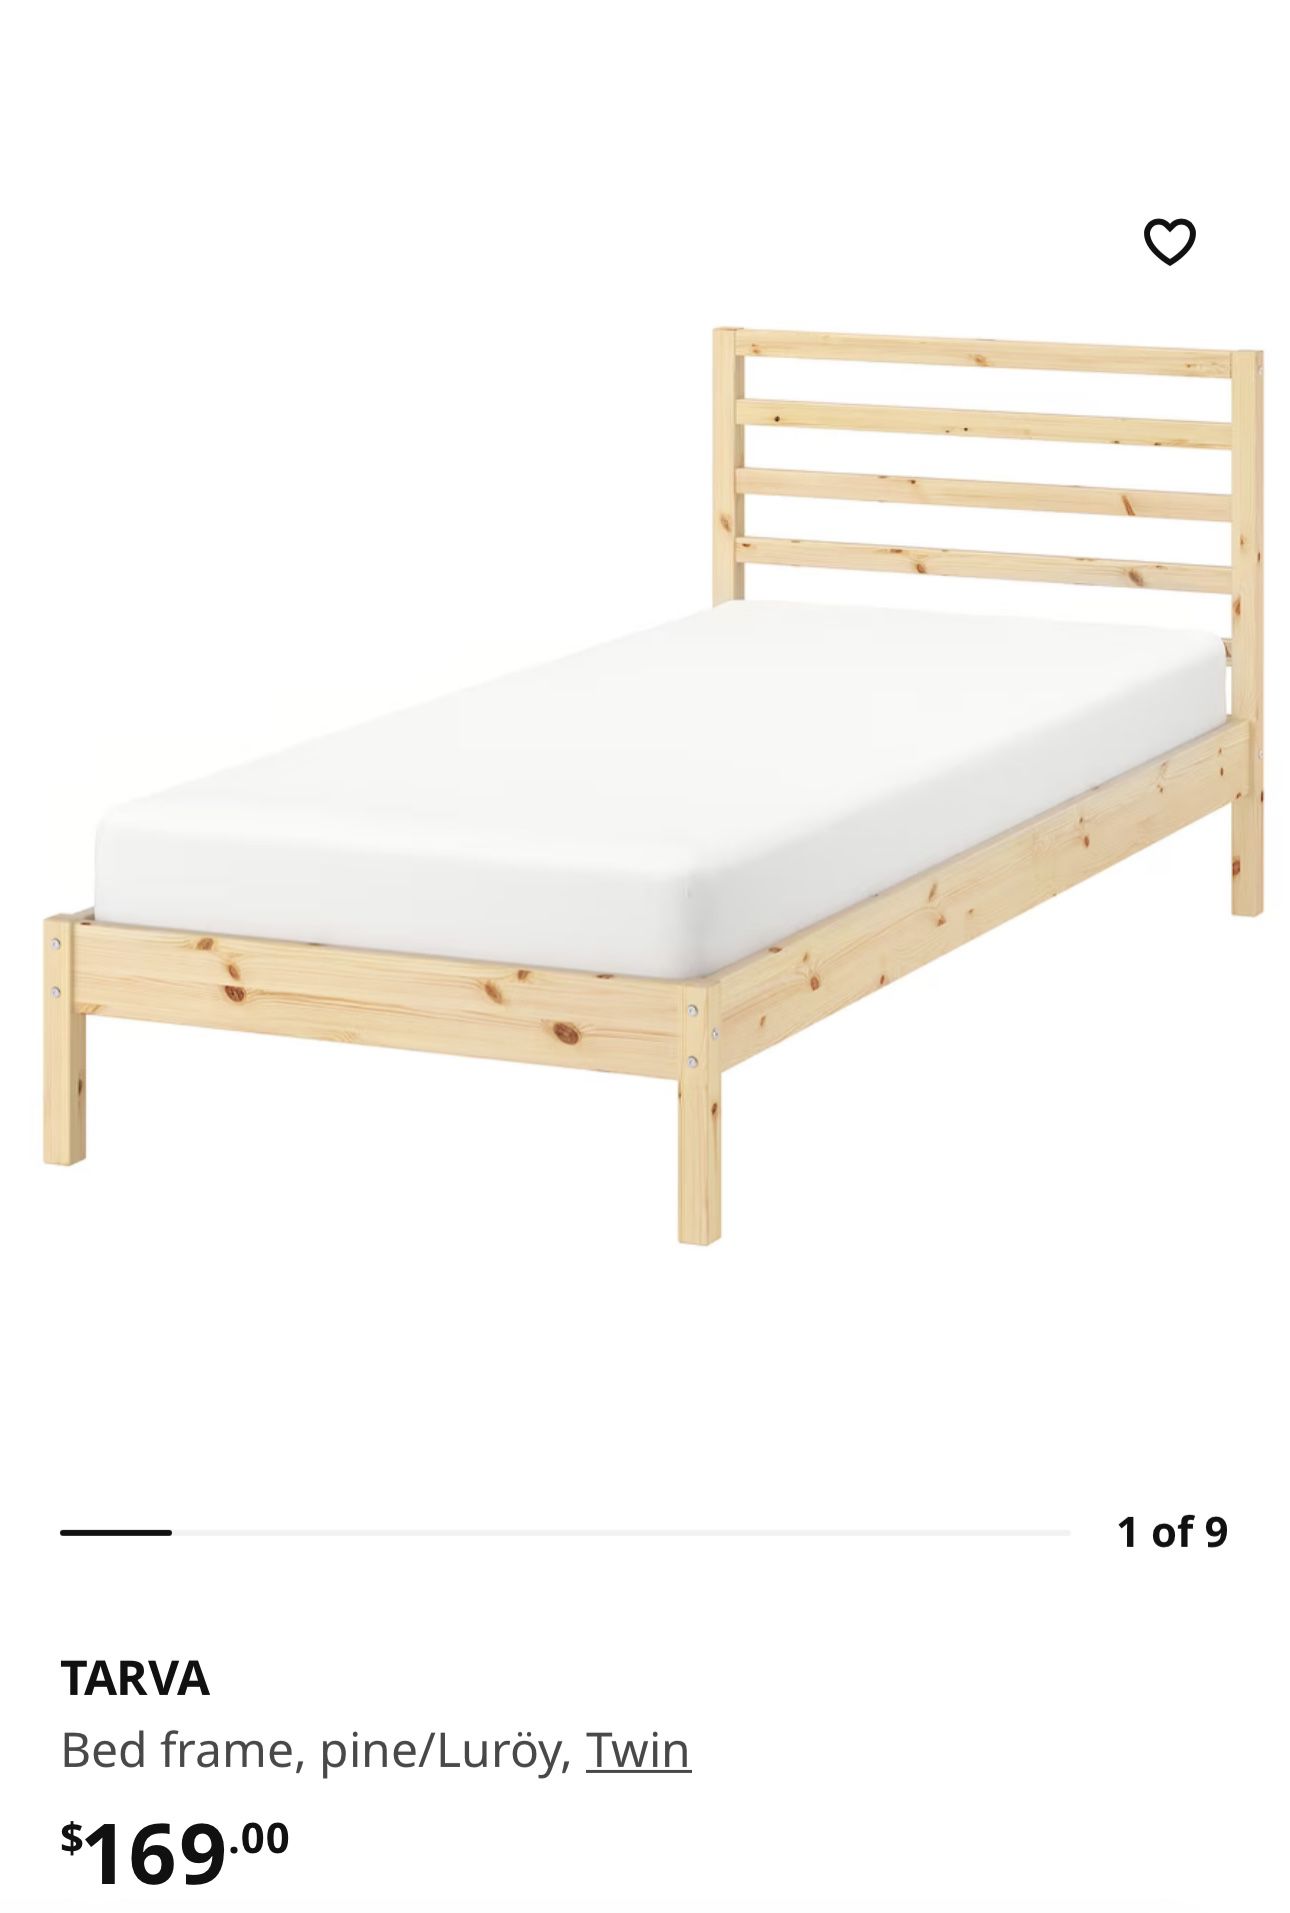 Ikea Tarva Pine Twin Bed - Kids • Toddlers • Cama • Muebles • Furniture for Sale - OfferUp